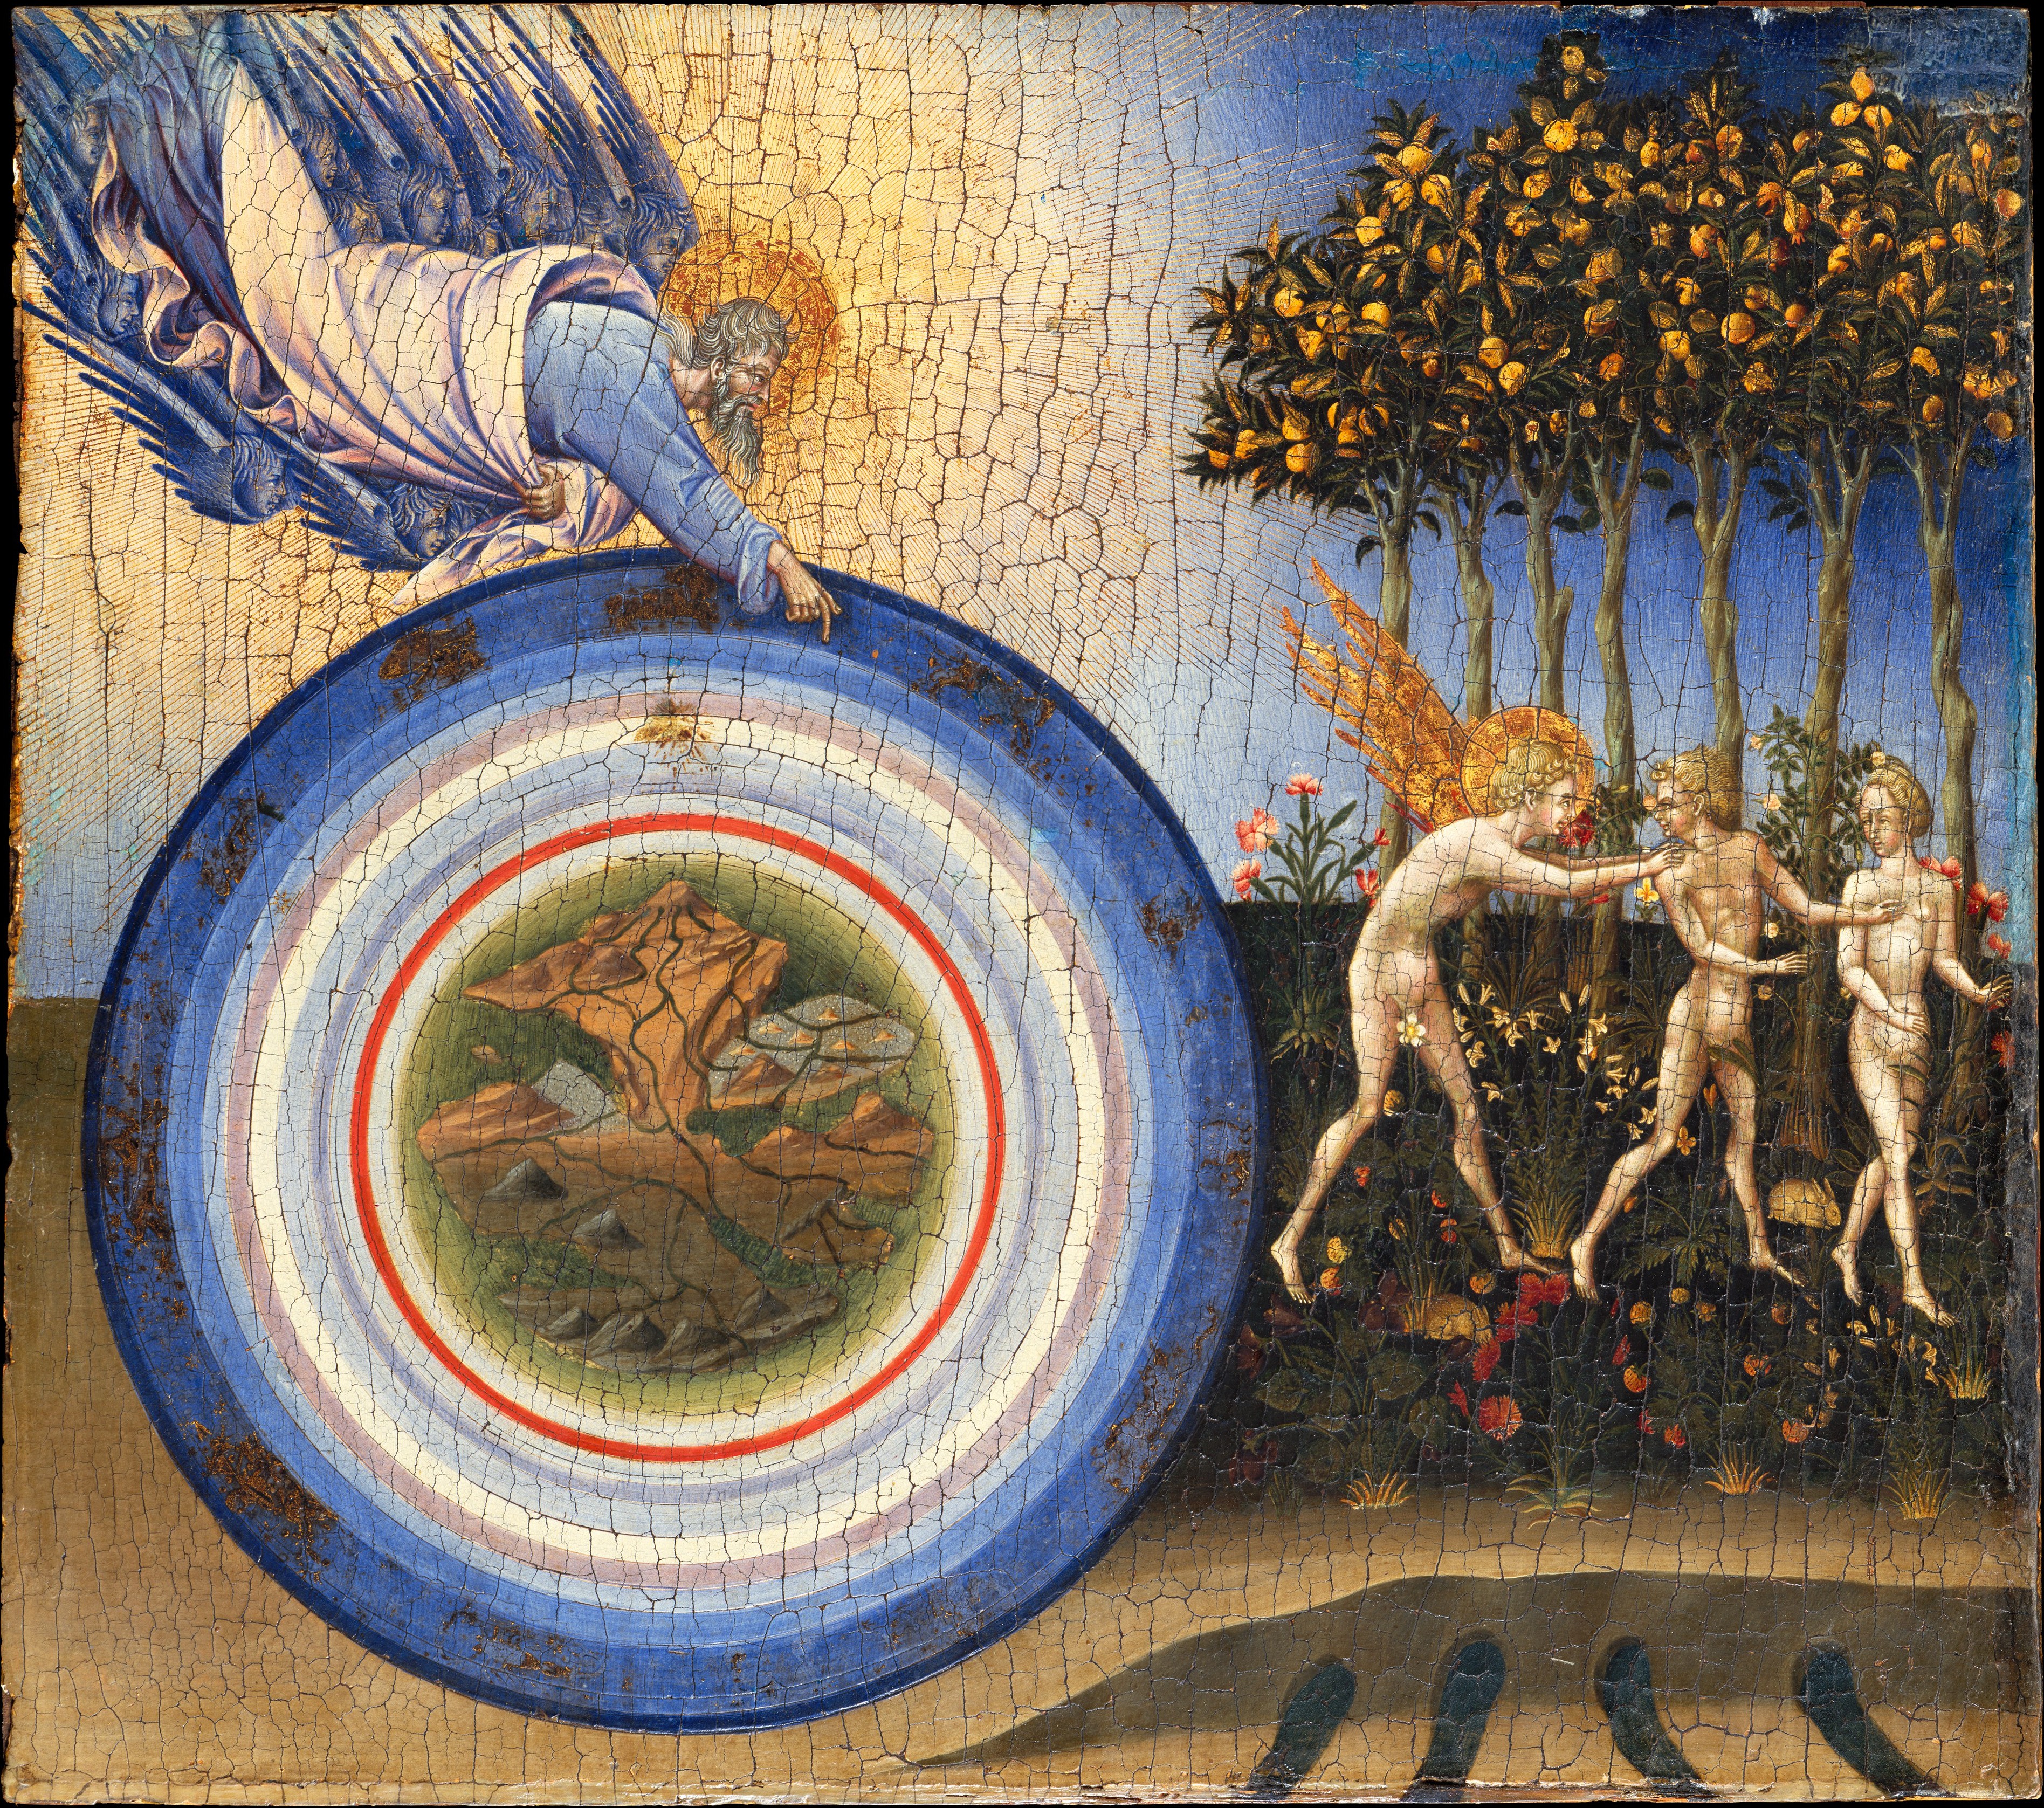 Painting by Giovanni di Paolo of "The Creation of the World and the Expulsion from Paradise"